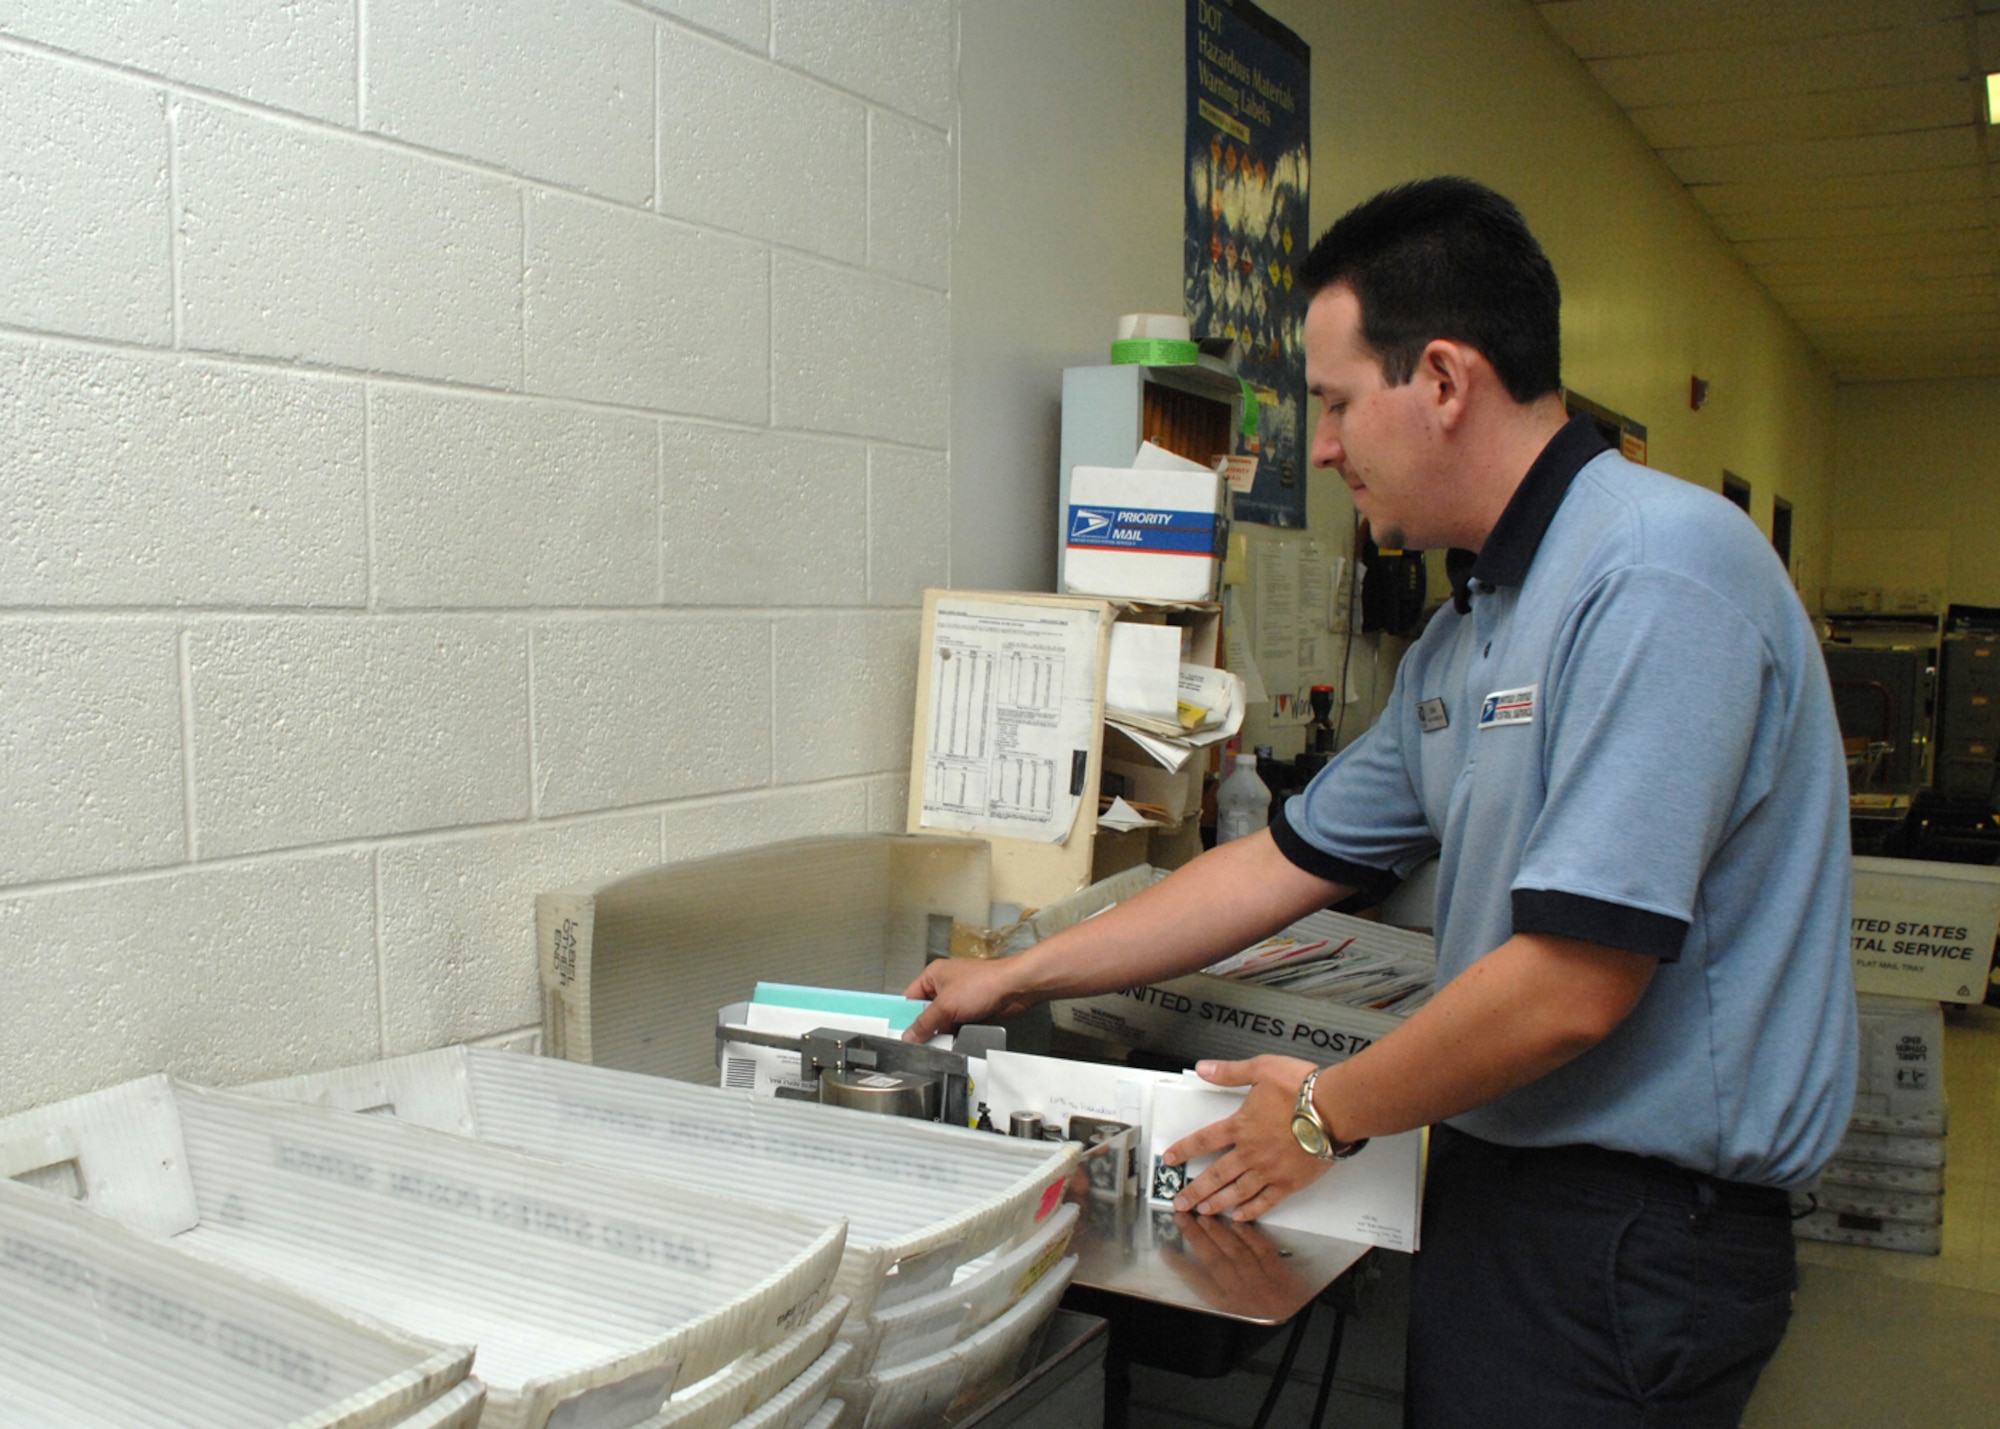 Sales Associate, John Filip of the Holloman Air Force Base Post Office cancels letters. Canceling letters marks the end of a letter's travel cycle and serves the purpose of postmarking letters and voiding the stamps.(U.S. Air Force photo/Senior Airman Tiffany Trojca)